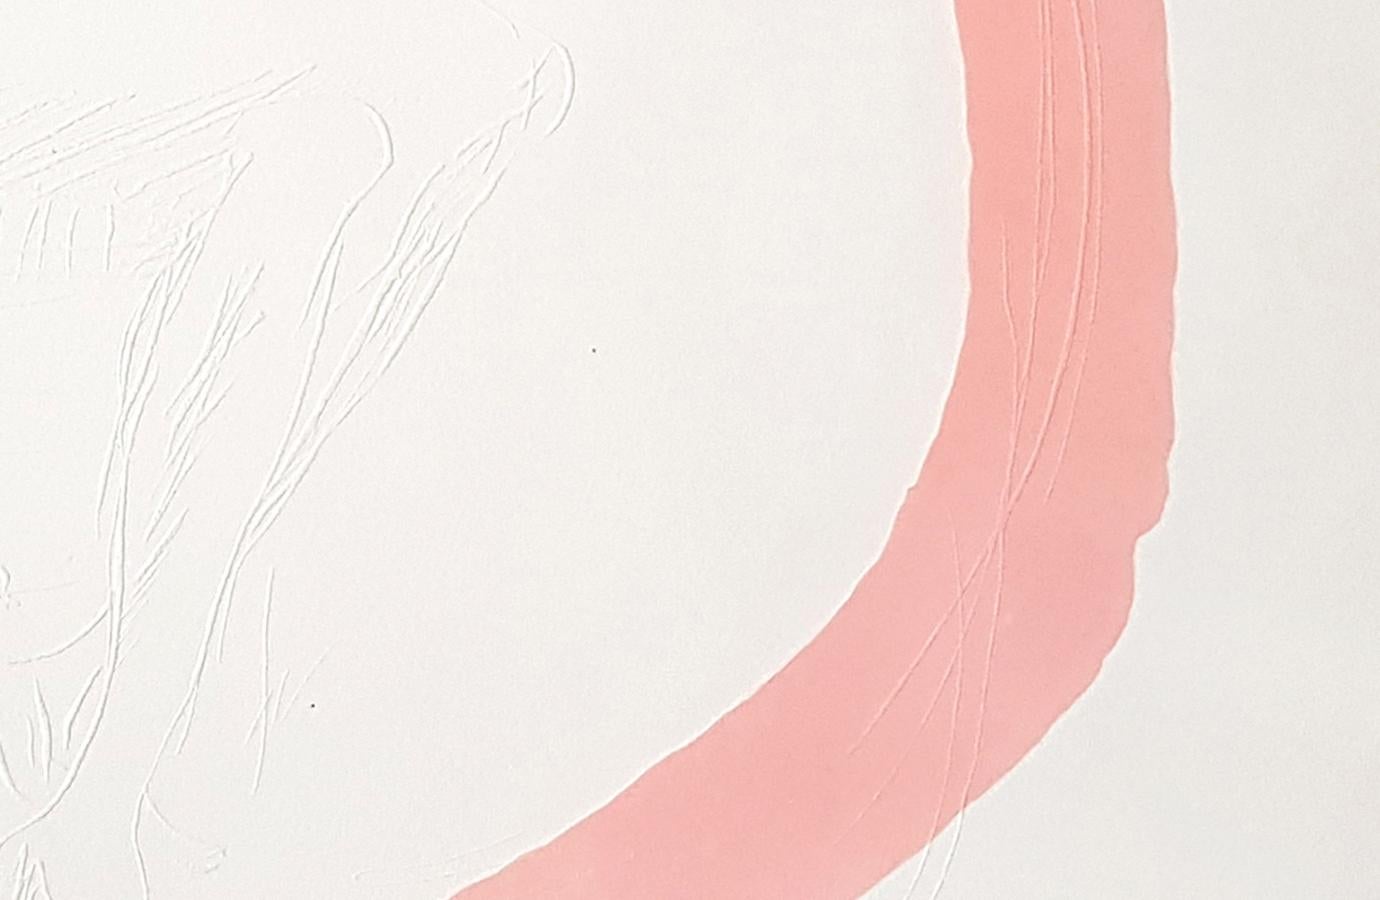 Lucio Fontana
Nudo Rosa, 1967
Color aquatint, etching and embossing
16 1/4x13 inches, full margins
Edition of 170
Signed and numbered in pencil, lower margin
Published by 2RC Edizioni d'Arte, Rome, with the ink stamp verso.
